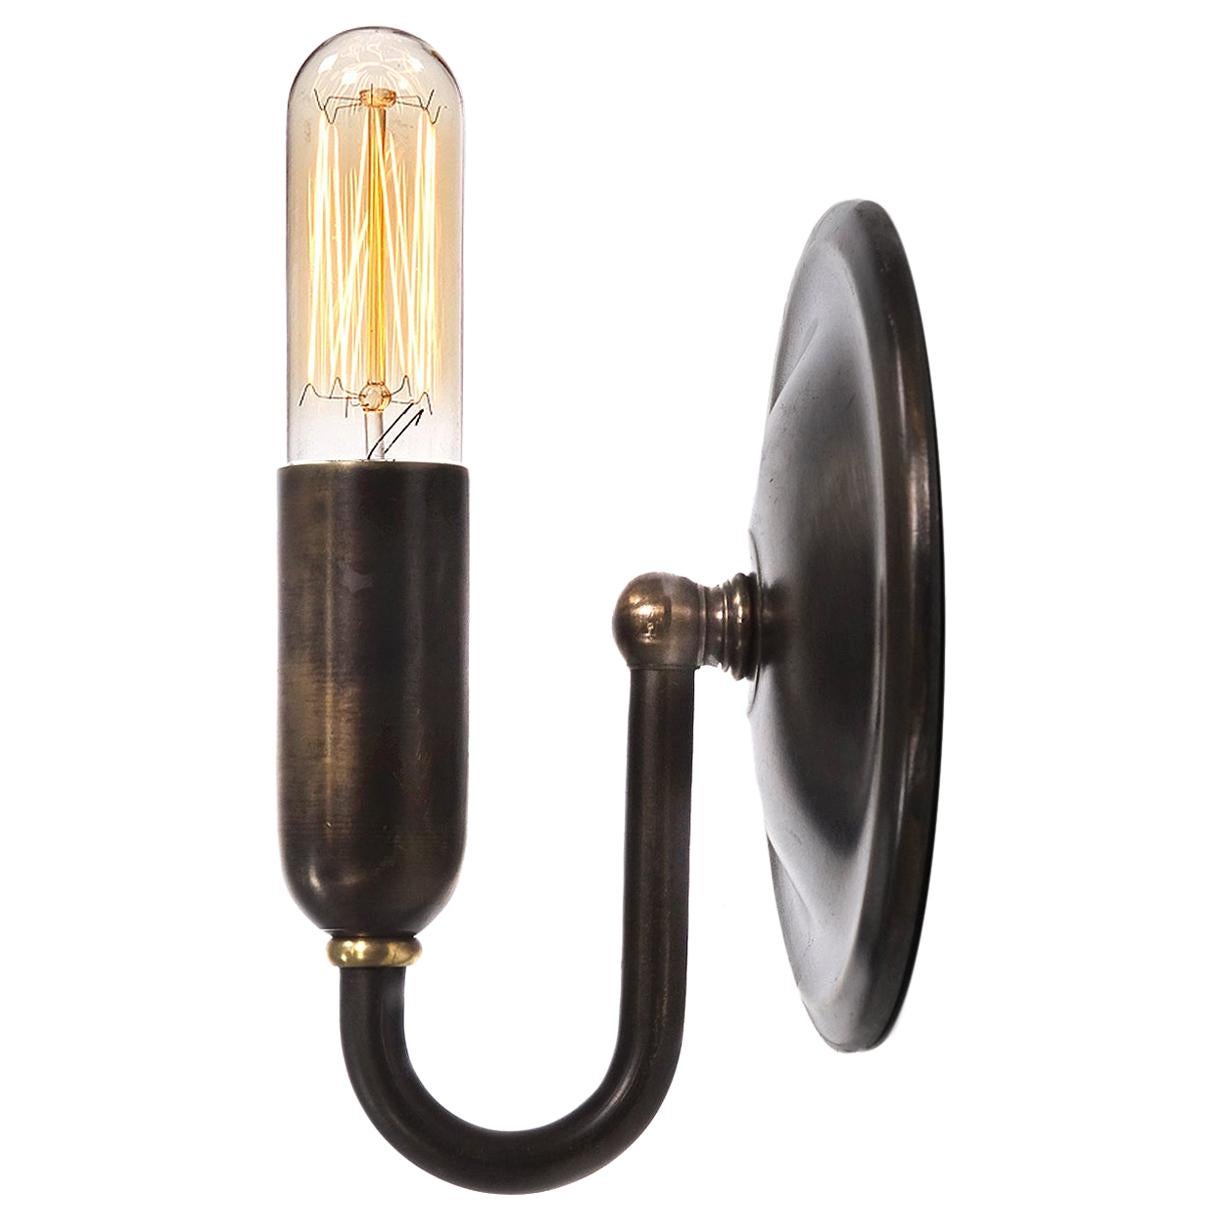 This is a very clean and simple pill shaped lamp. The lamp is half brass. The look goes well with all styles. The lamp housing and bulb has a 1 inch diameter and is 5 inches long.